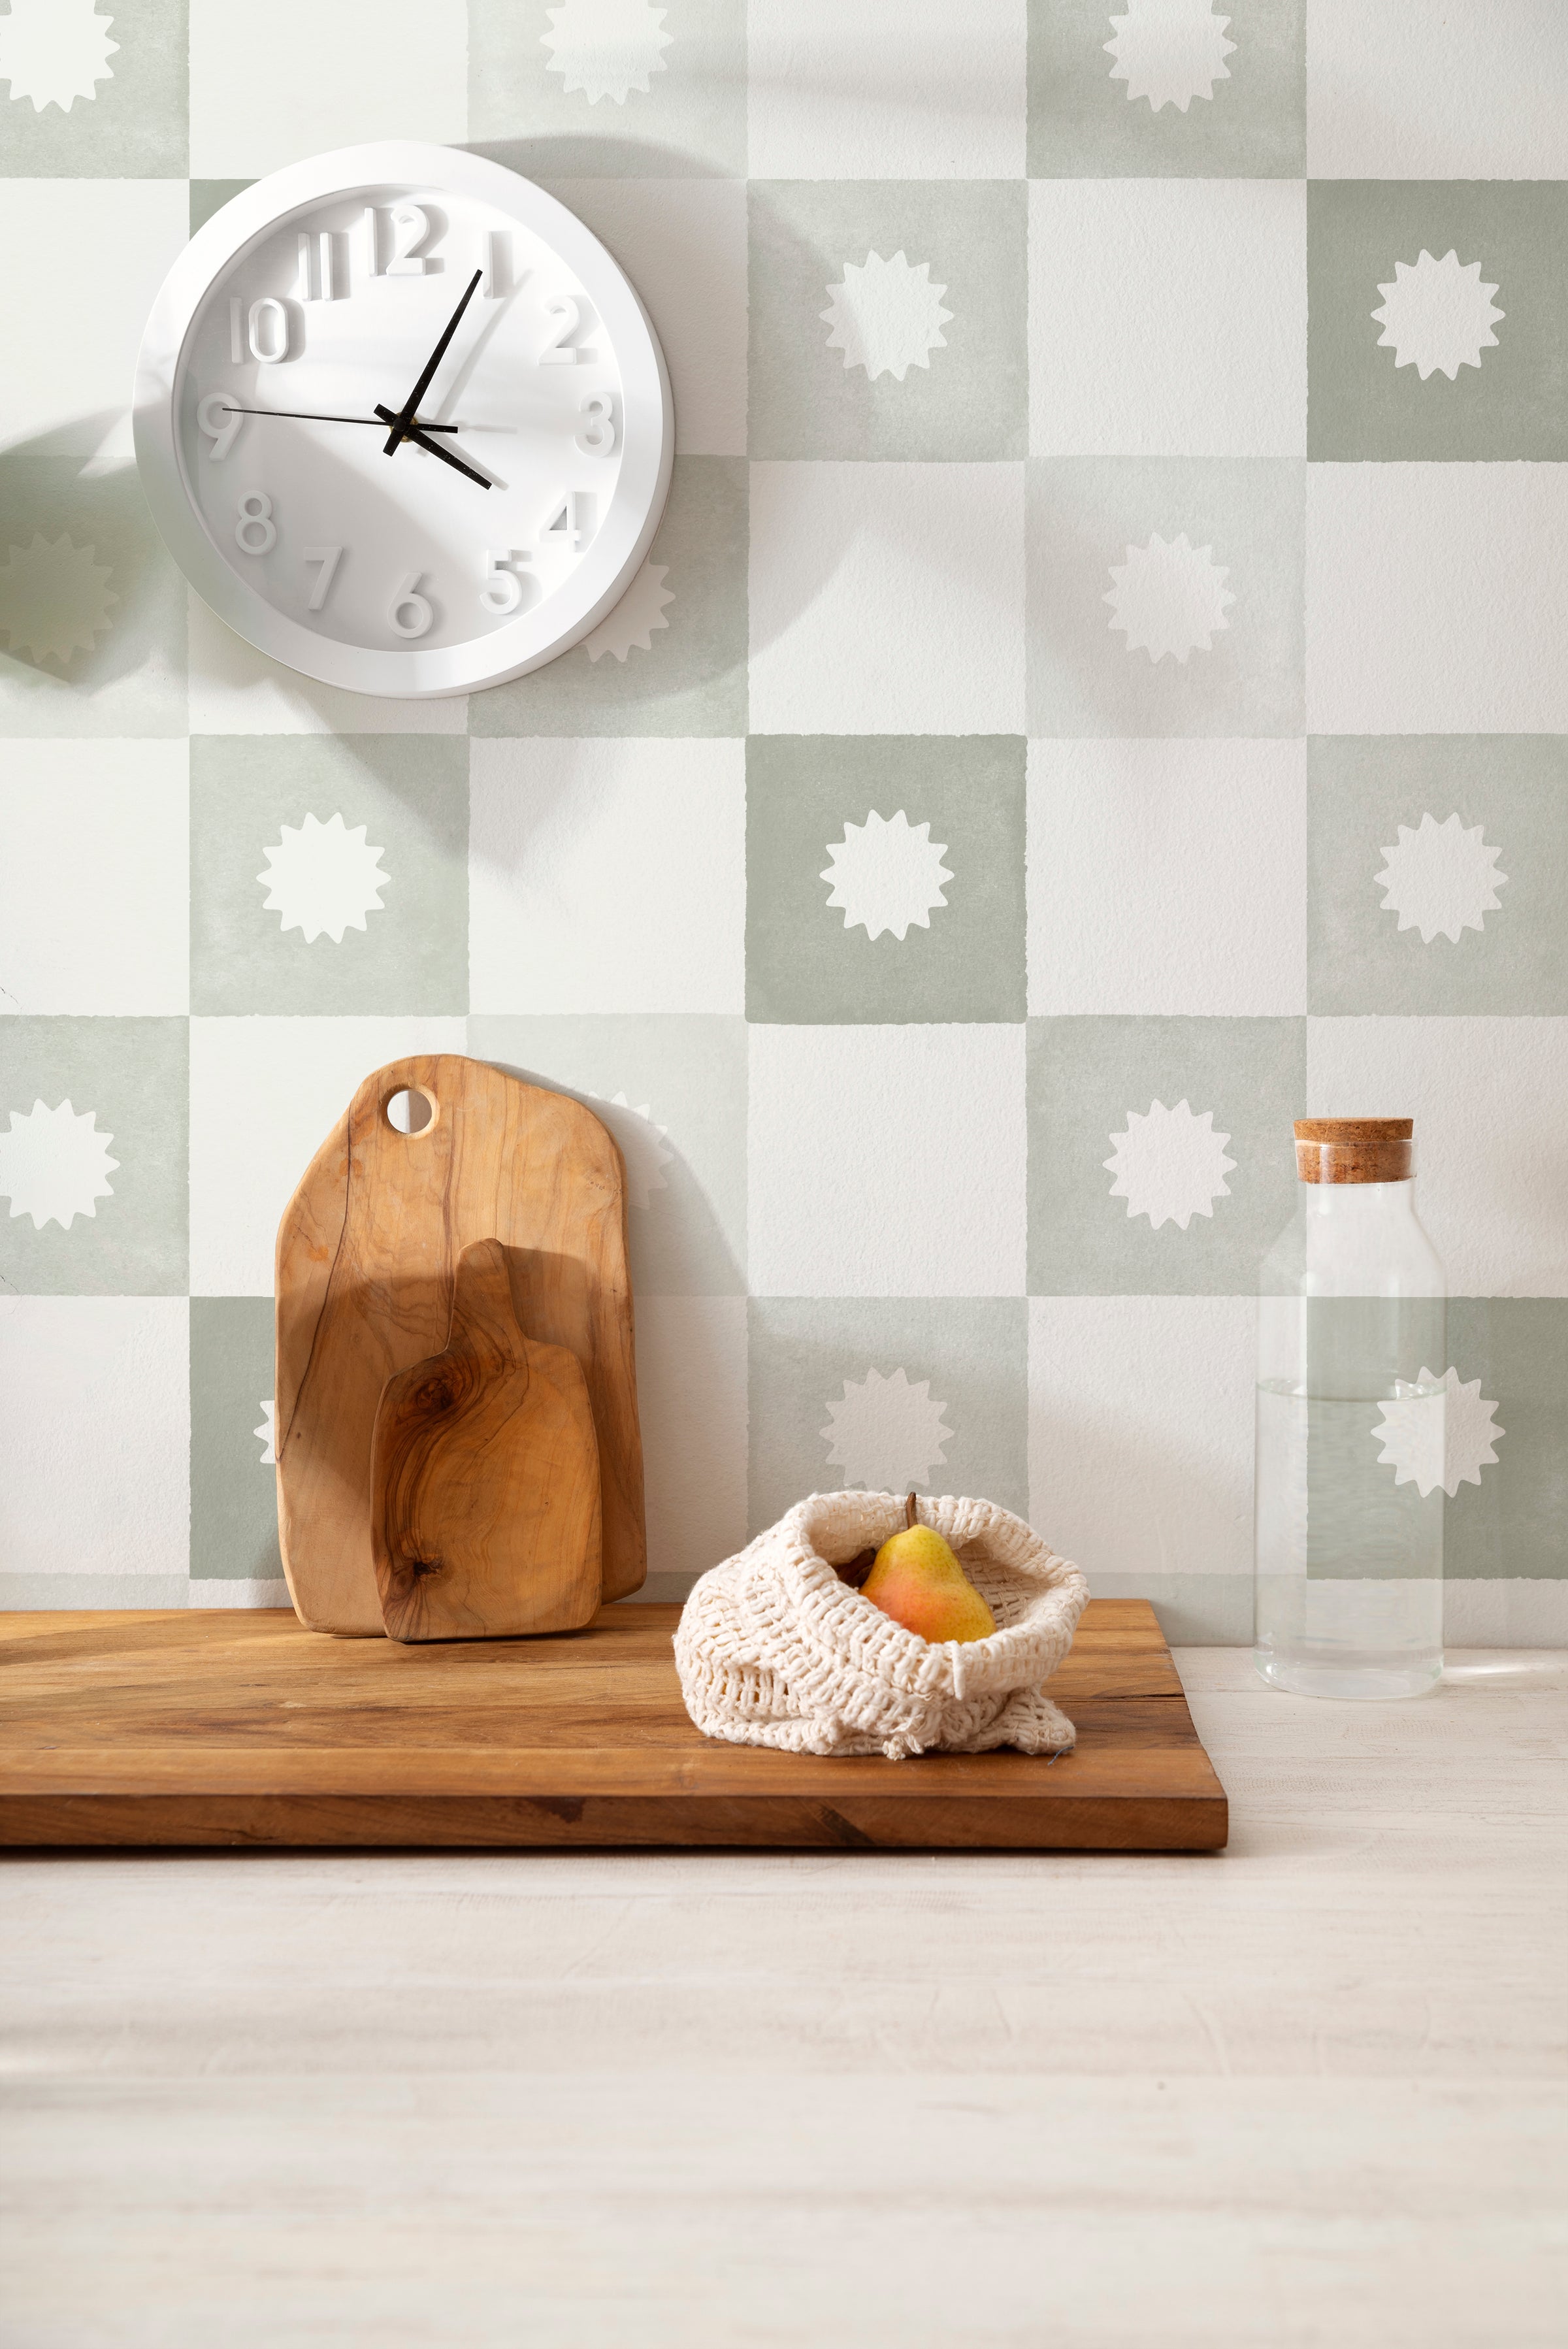 A modern kitchen setup against a wall adorned with olive and white checkered wallpaper featuring a distinct white floral emblem in each olive square. A white wall clock, a rustic wooden chopping board, and a water bottle add to the functional yet stylish decor.